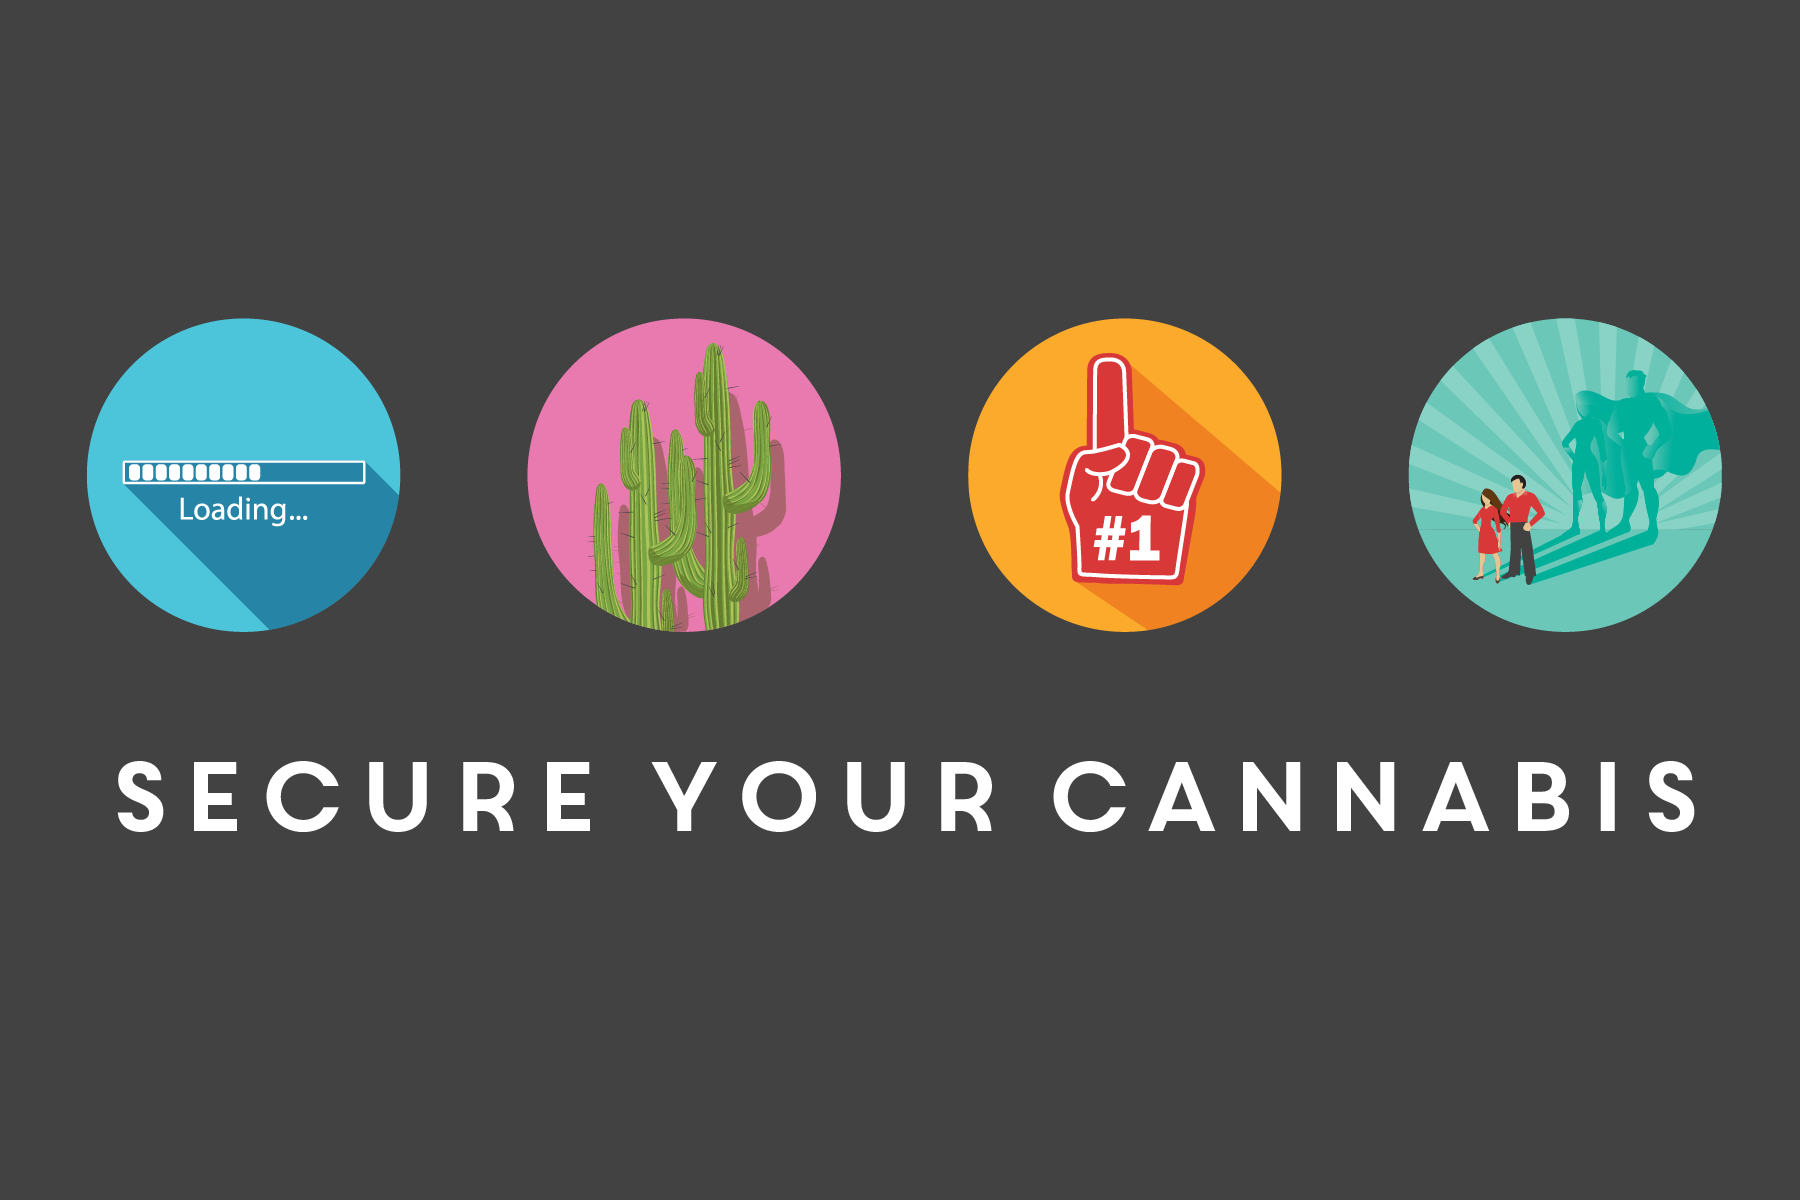 Secure Your Cannabis campaign